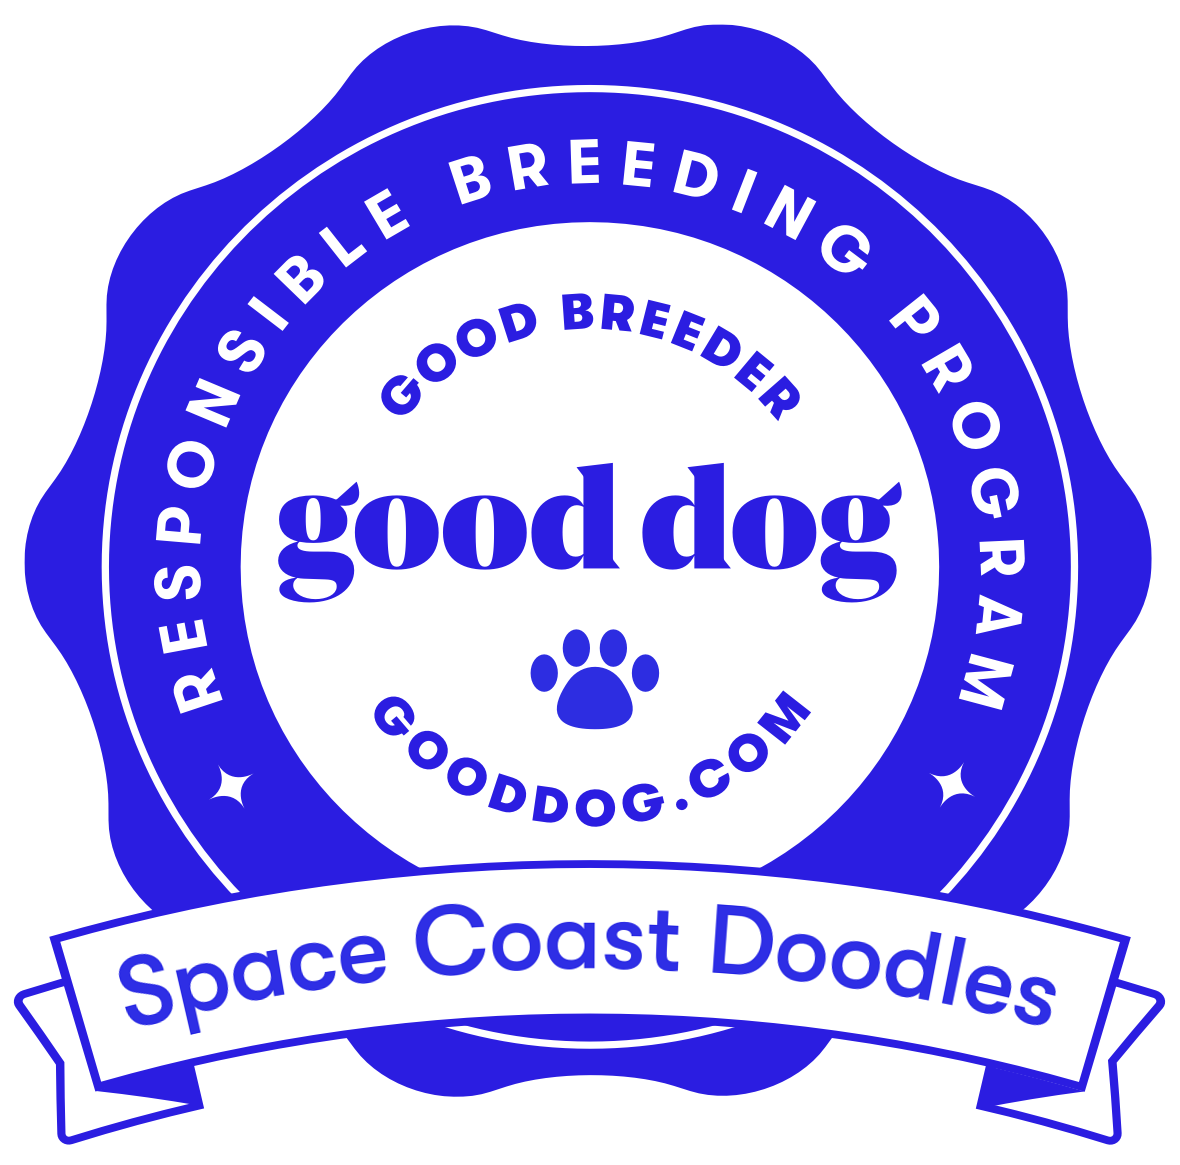 Space Coast Doodles is a Good Dog Approved Breeder